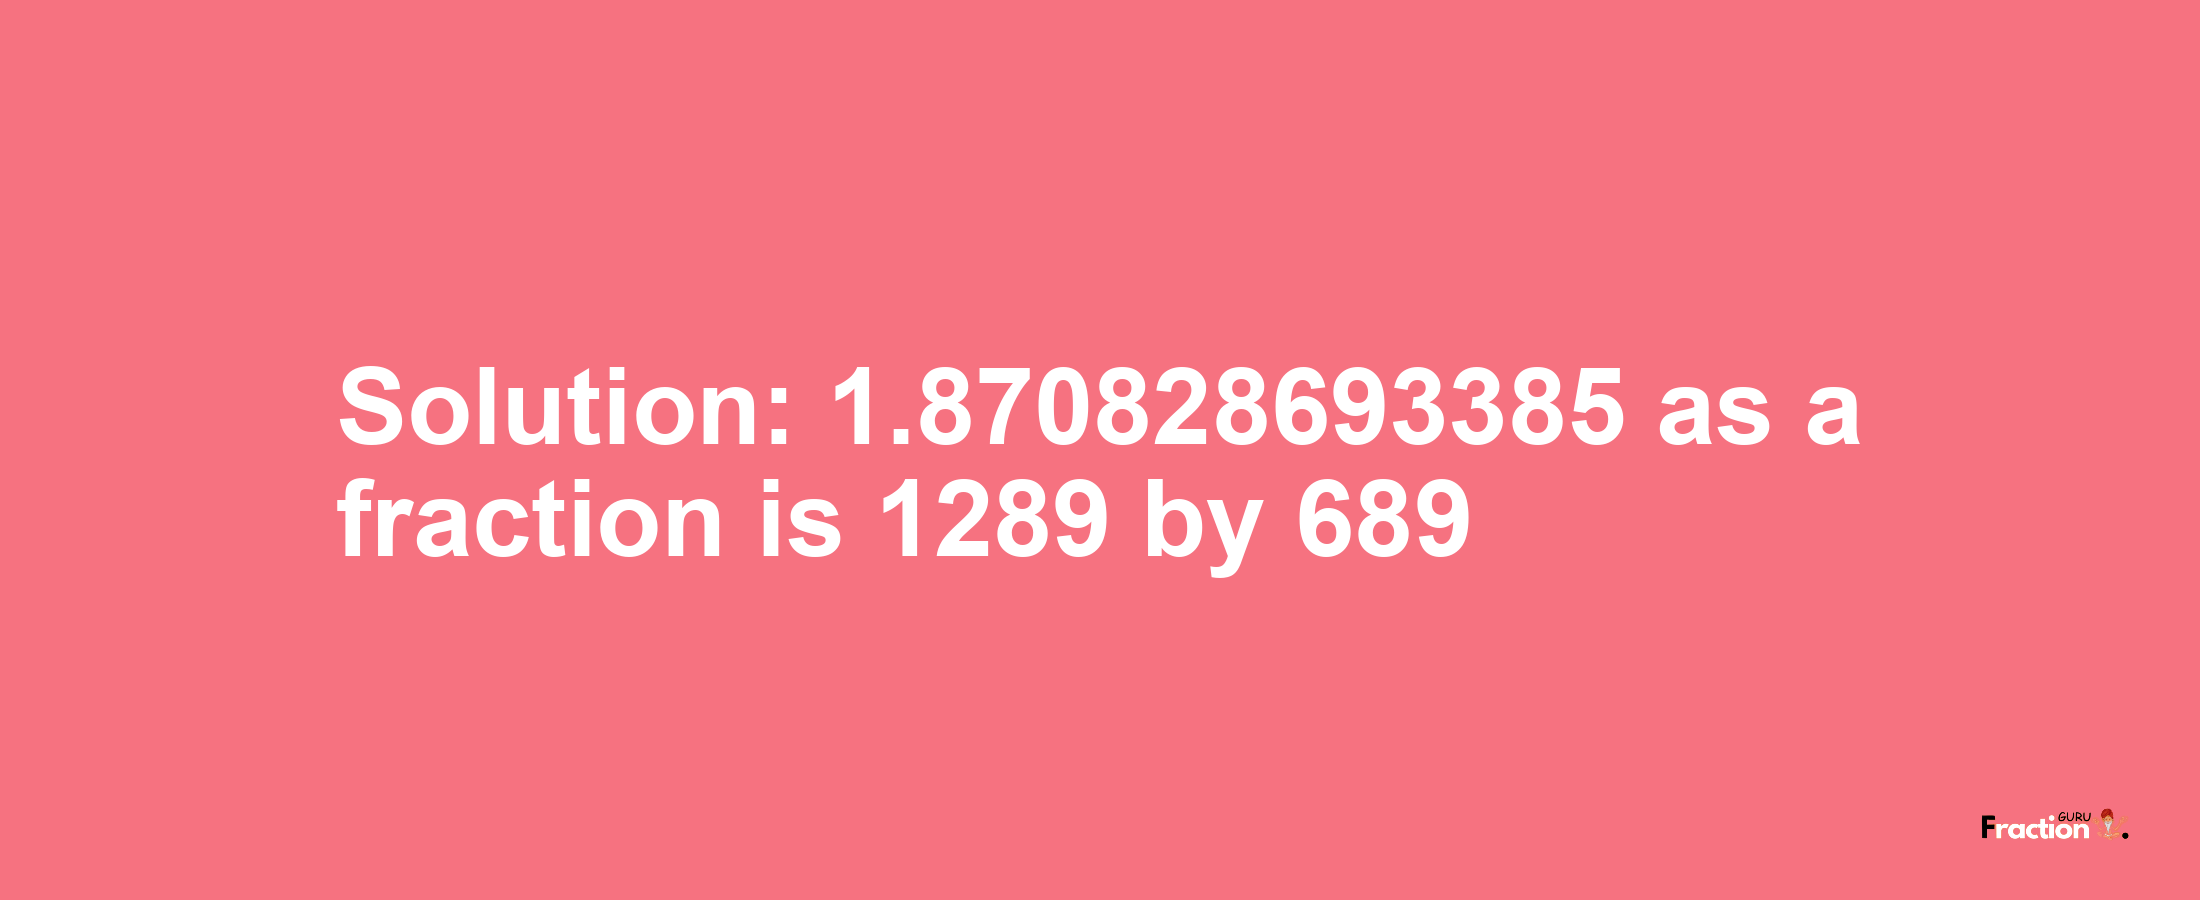 Solution:1.870828693385 as a fraction is 1289/689